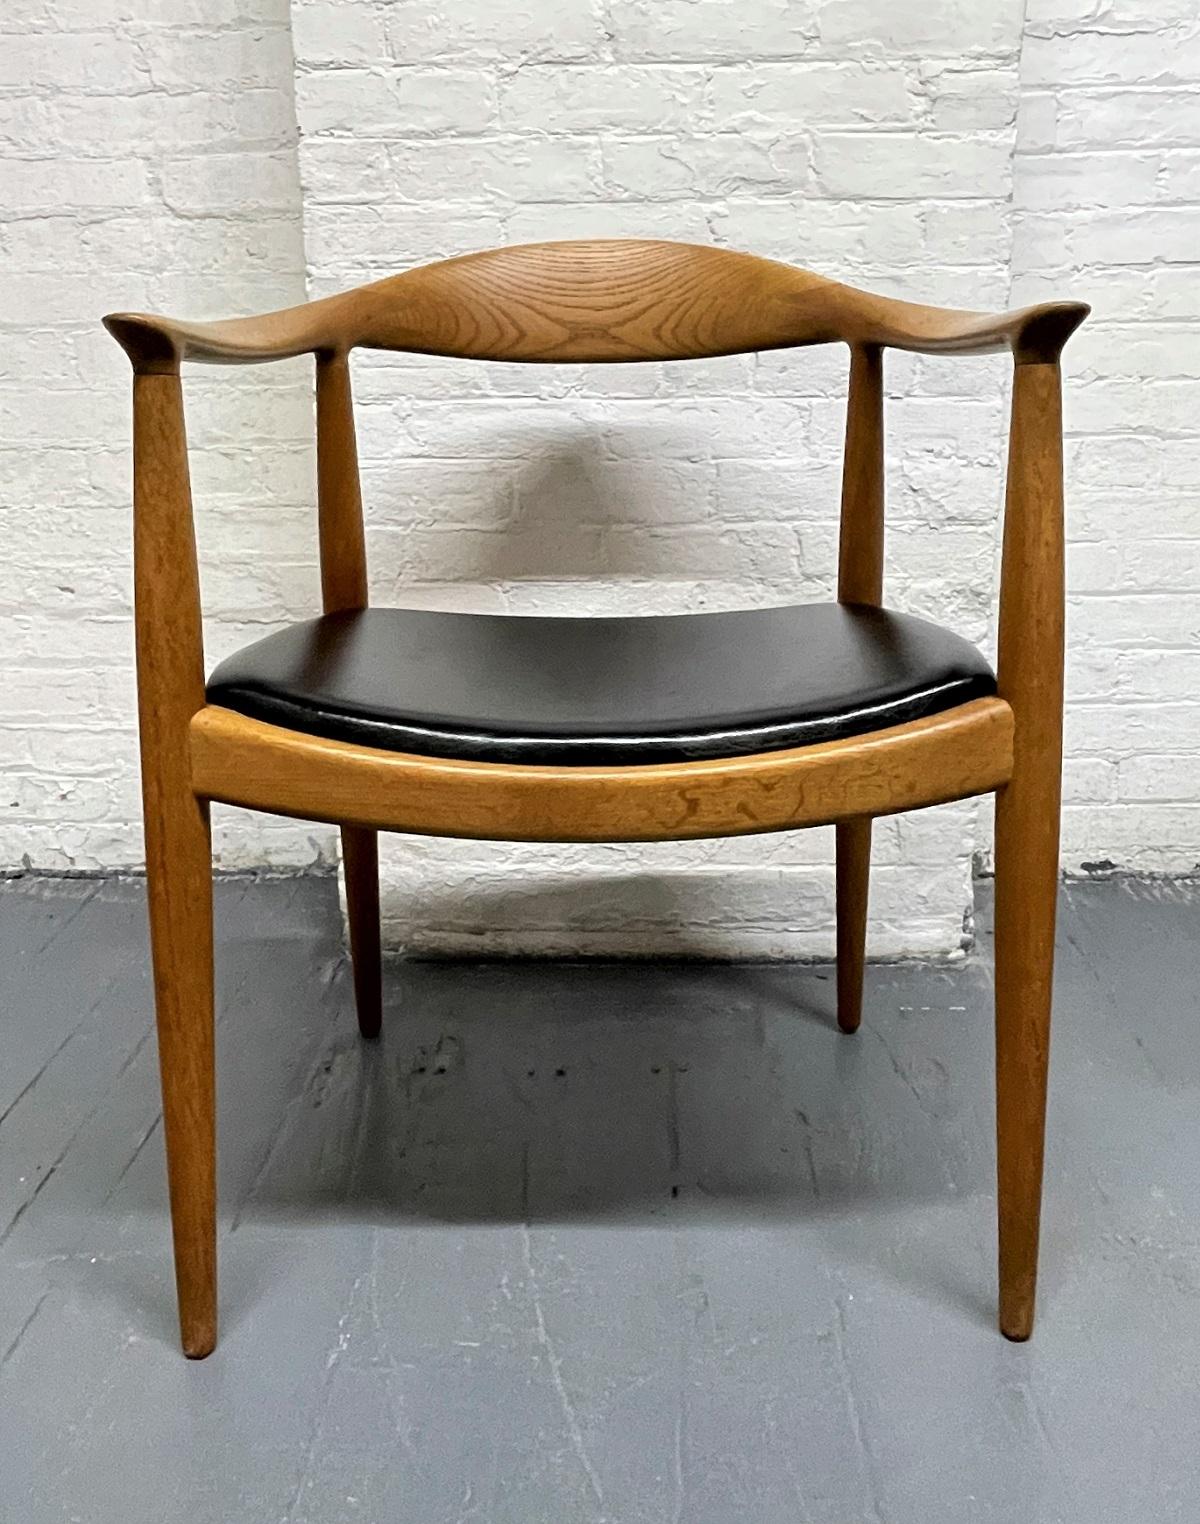 Set of 4 Hans Wegner Round Chairs for Johannes Hansen. Also known as The Chair. Each chair has curved backs constructed from oak with conforming pin shaped legs with original leather seats. Each stamped with manufacturer's mark underside of each